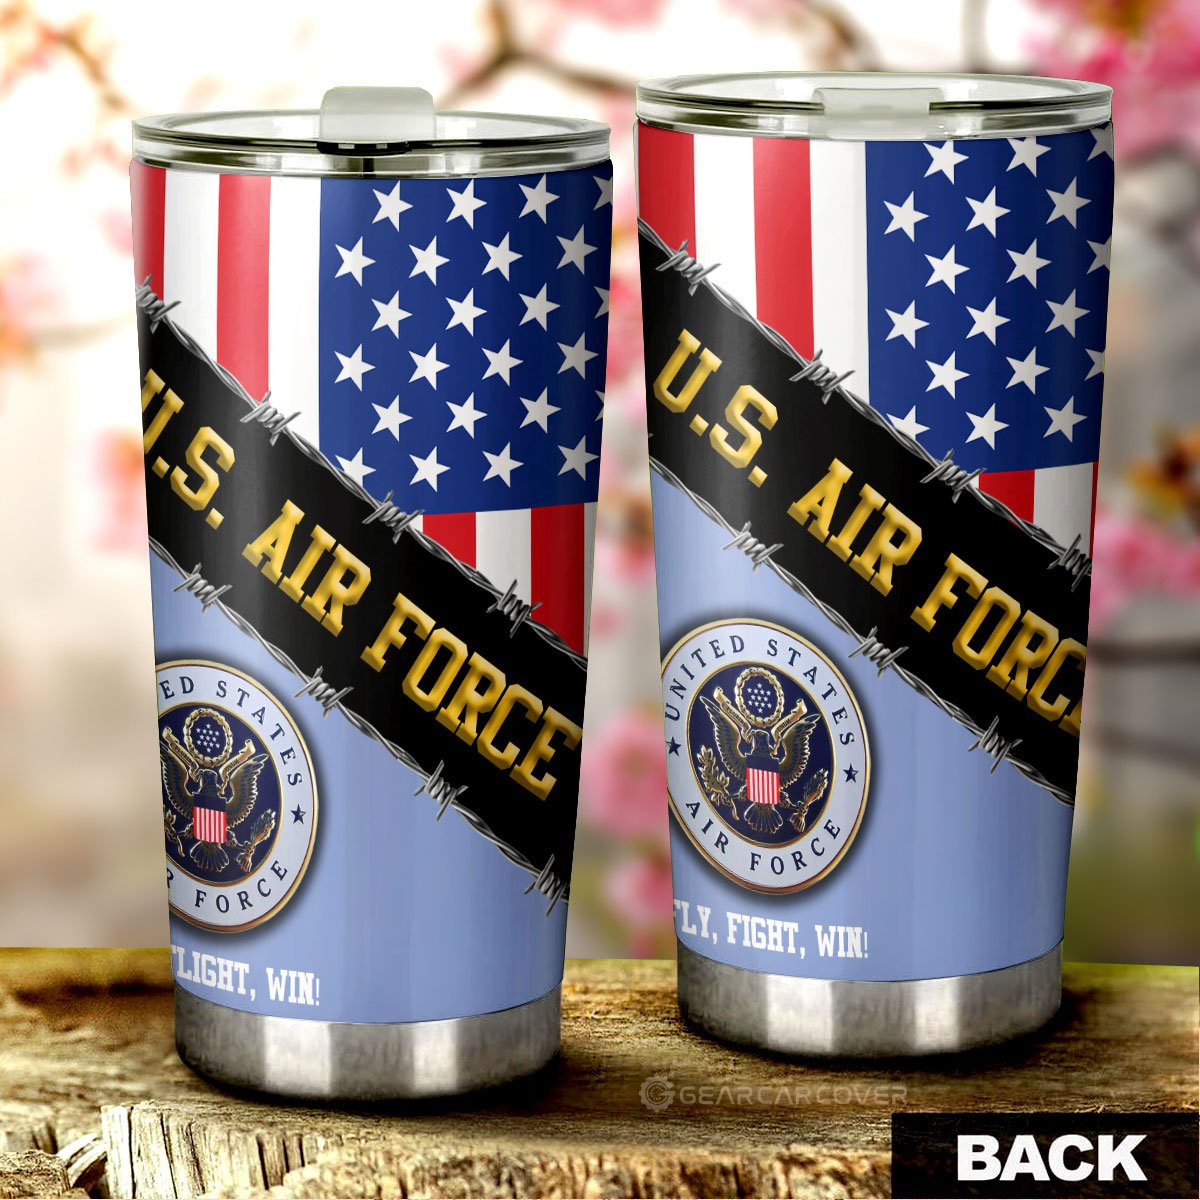 U.S. Air Force Tumbler Cup Custom United States Military Car Accessories - Gearcarcover - 3